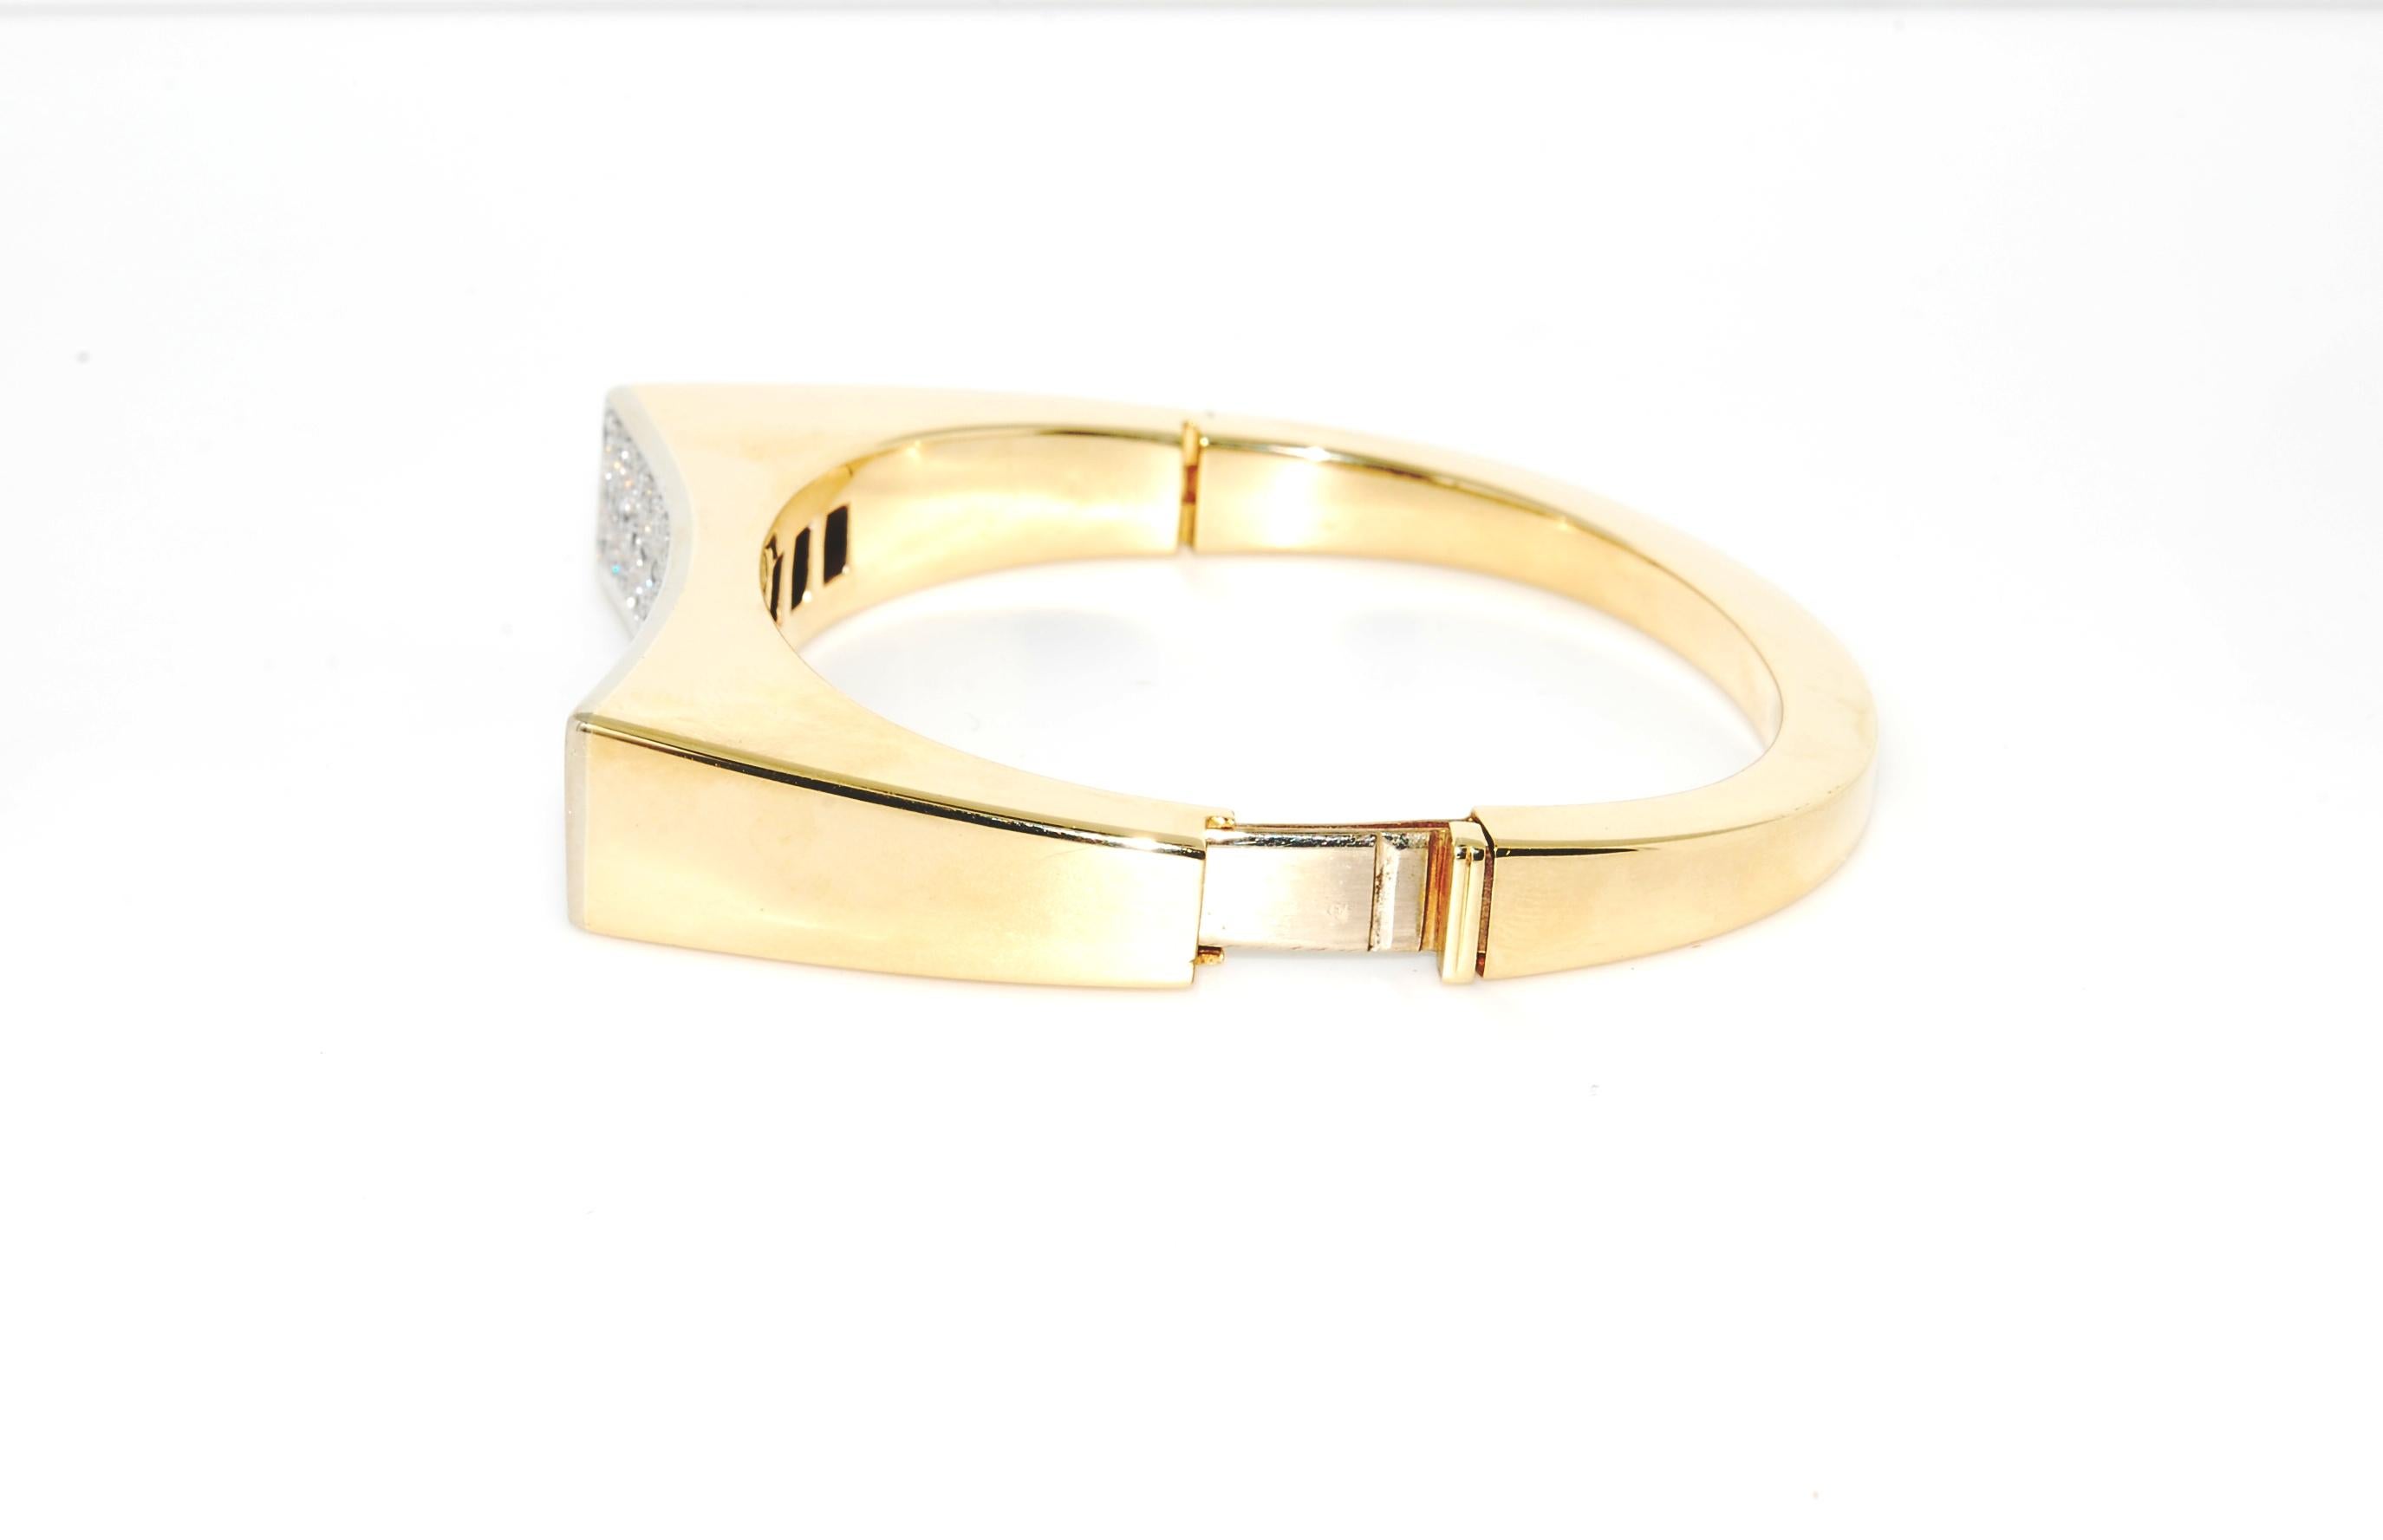 Retro Diamond Cuff Bracelet in 14 Karat Yellow Gold, Made in Italy, Almost 4 Carat For Sale